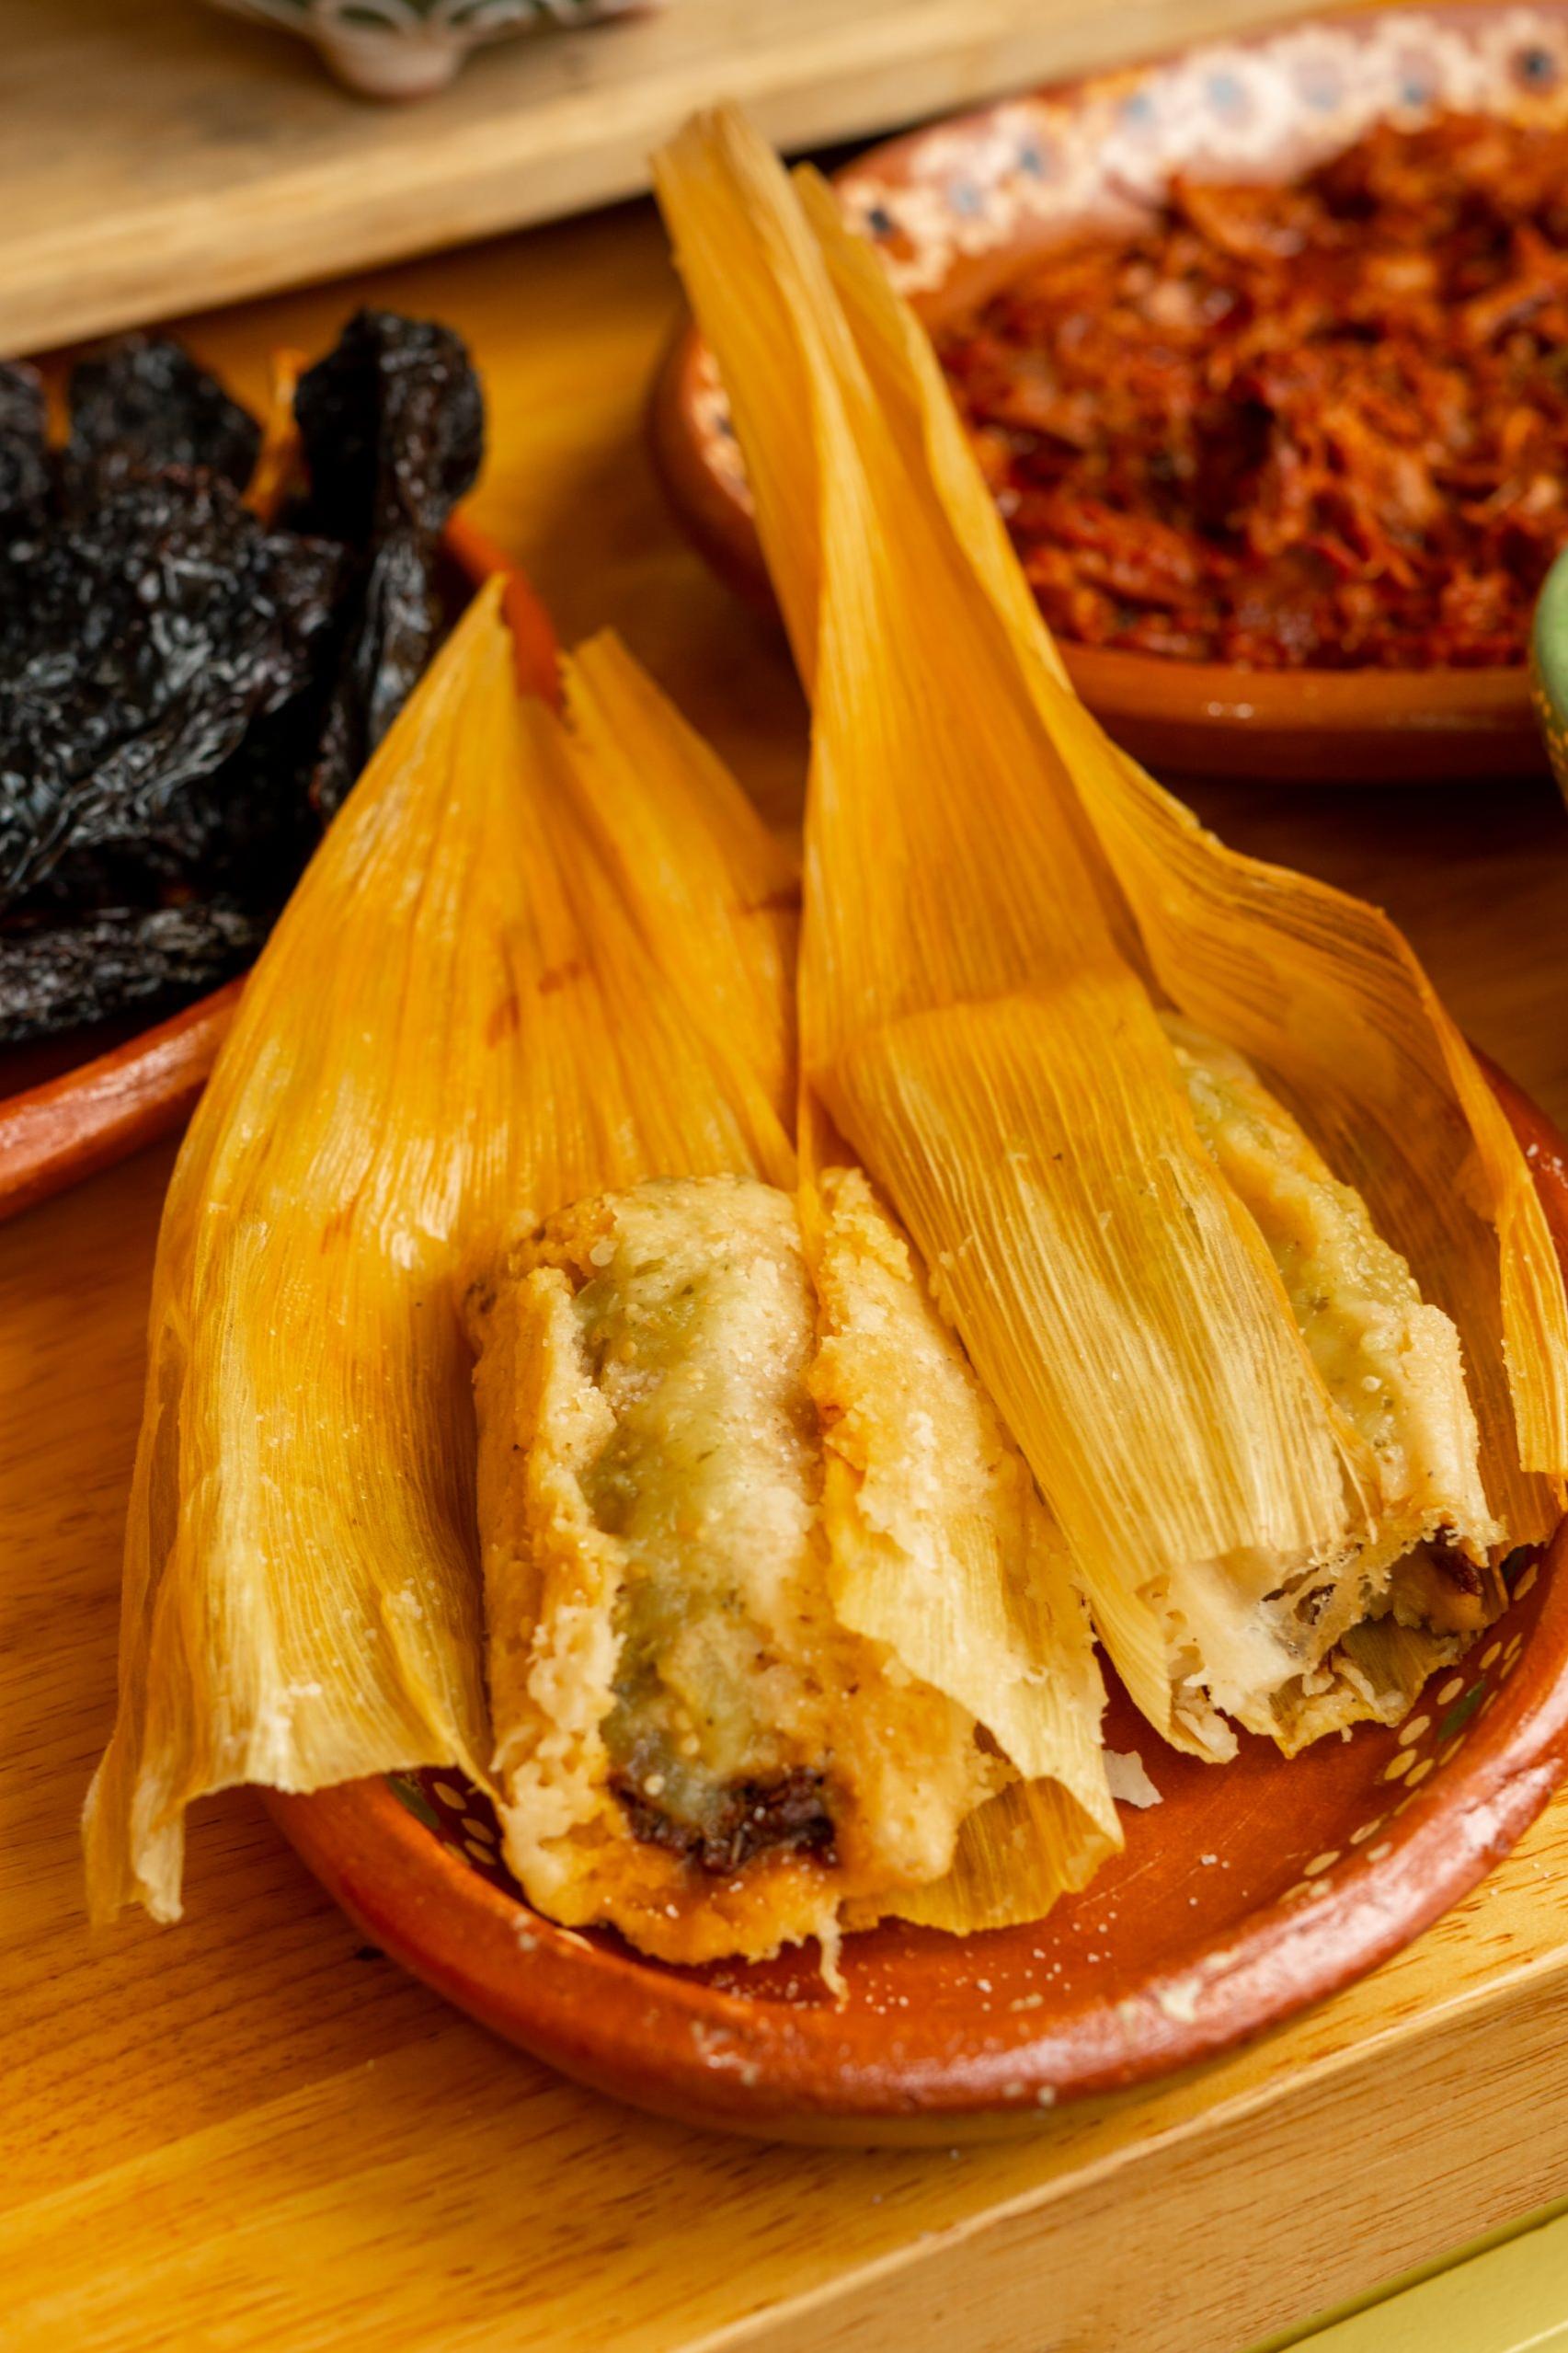  The perfect combination of savory and spicy, tamales are always a win!